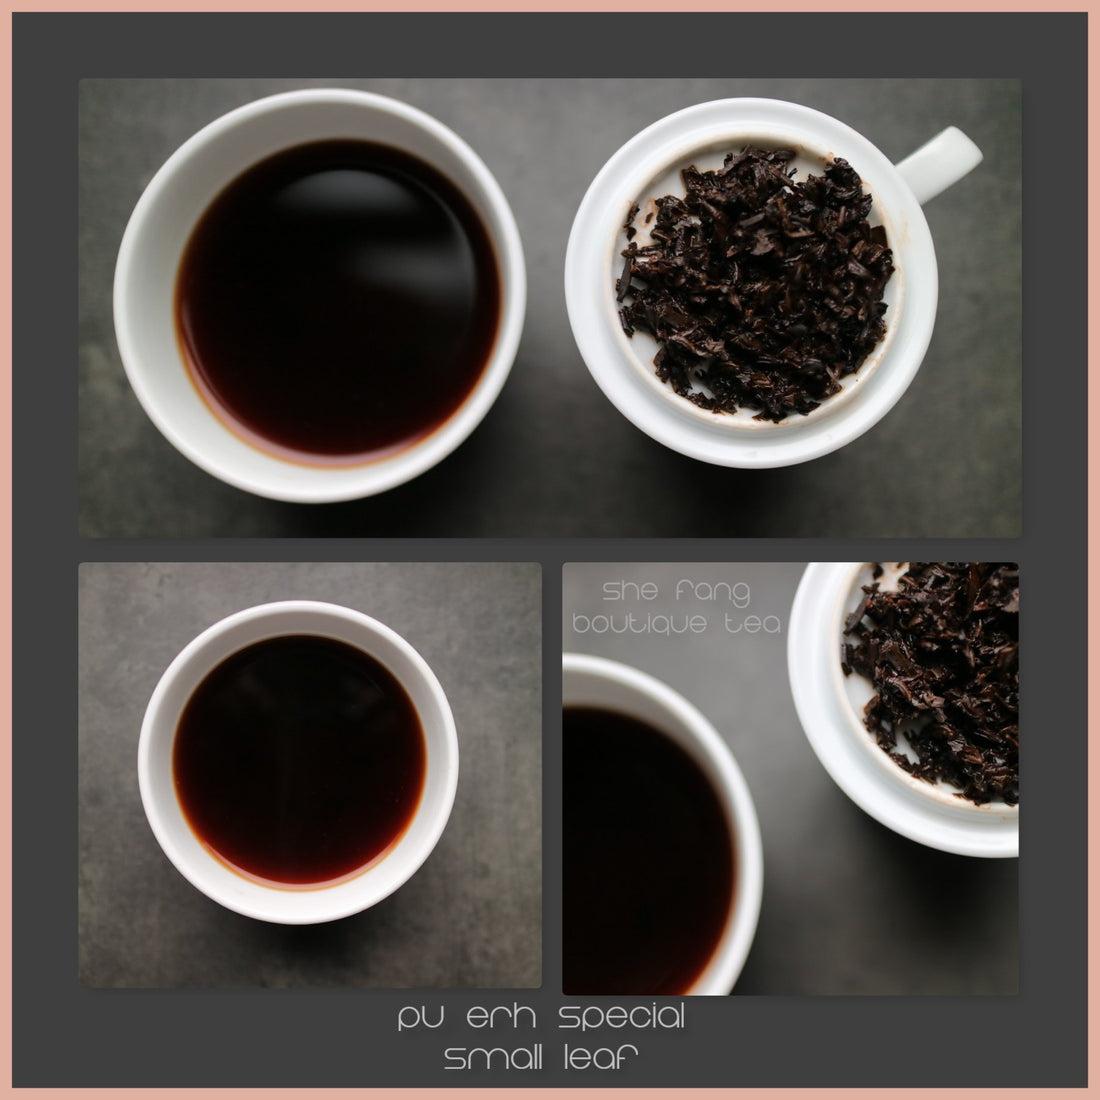 Tasting notes - China Yunnan Special PU ERH Small Leaf - Shou “Ripe/cooked” - She Fang Boutique Tea